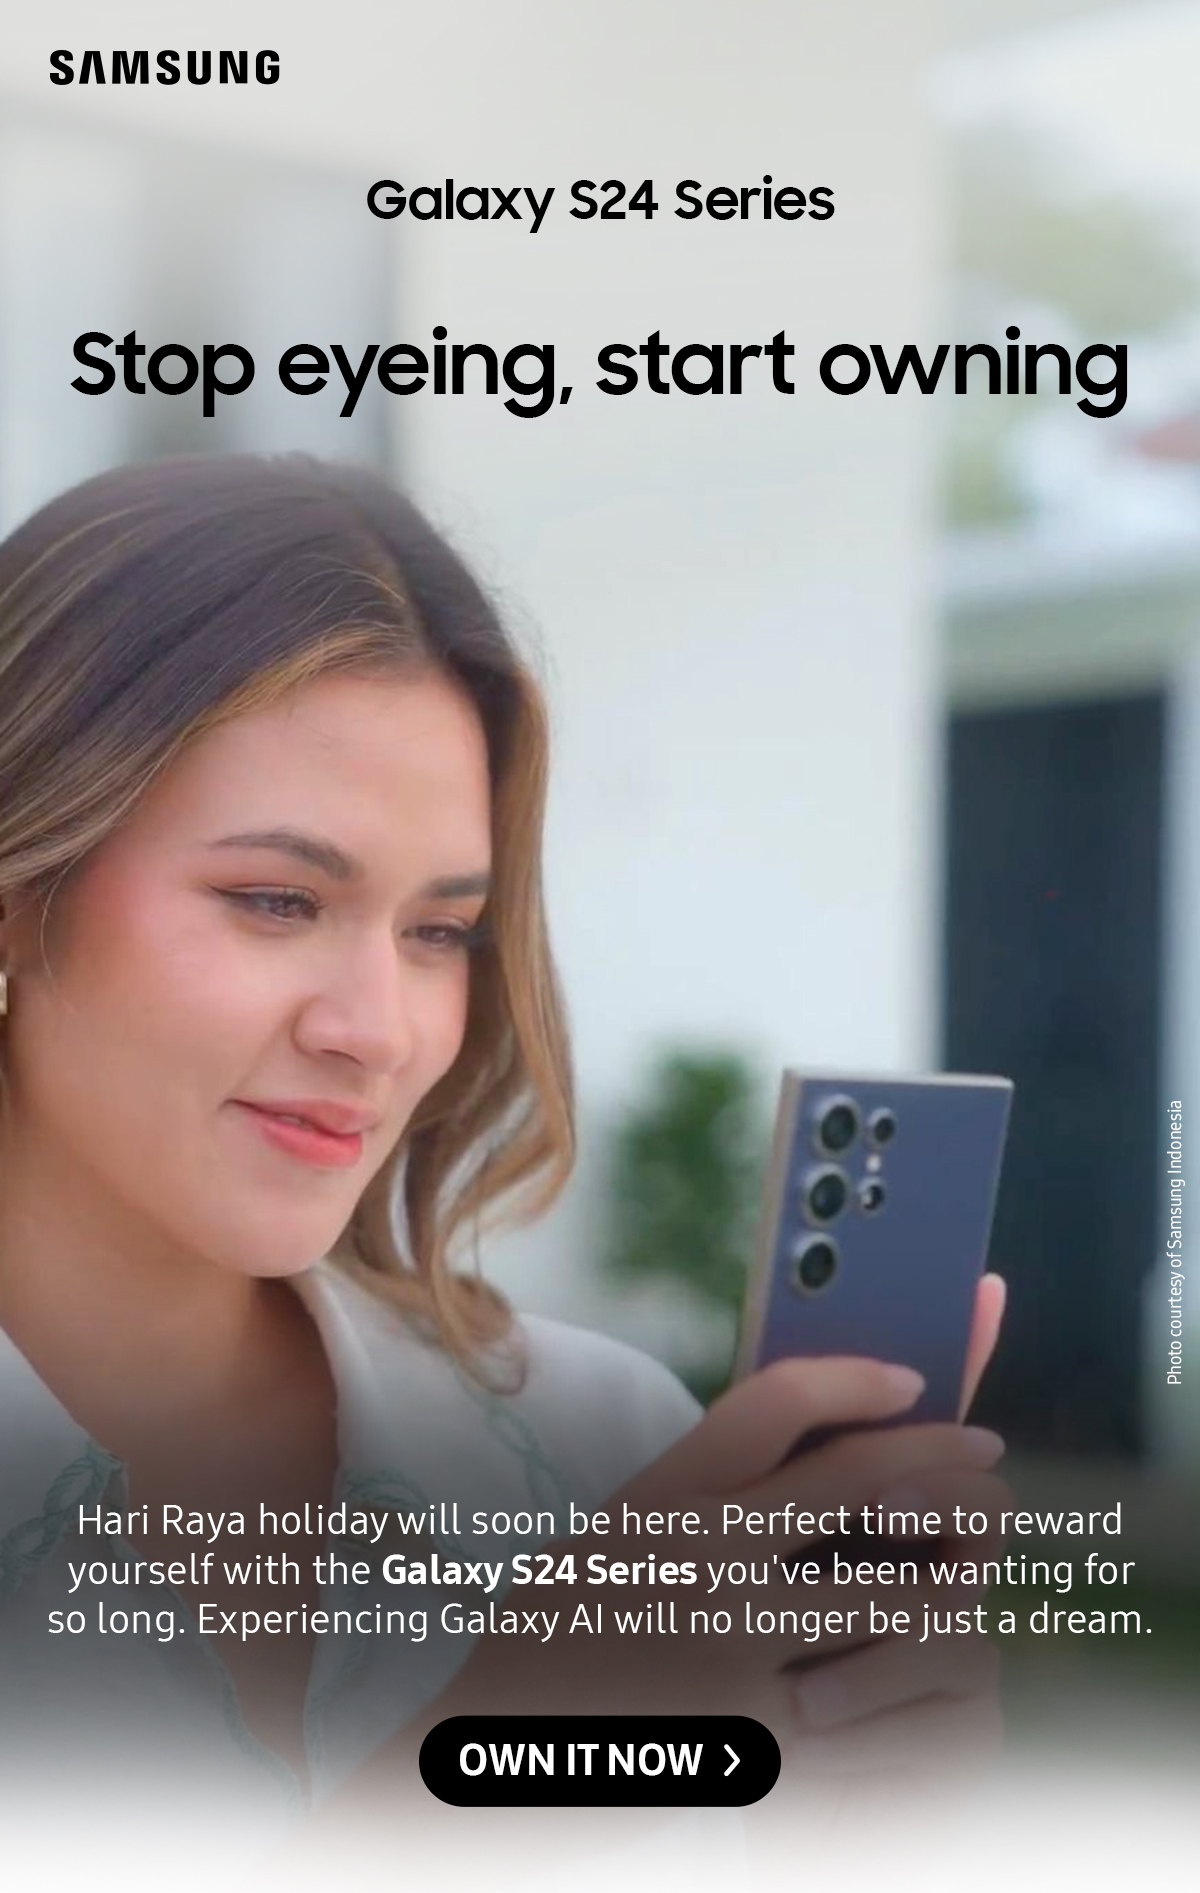 Stop eyeing, start owning | Hari Raya holiday will soon be here. Perfect time to reward yourself with the Galaxy S24 Series you've been wanting for so long. Experiencing Galaxy Al will no longer be just a dream.